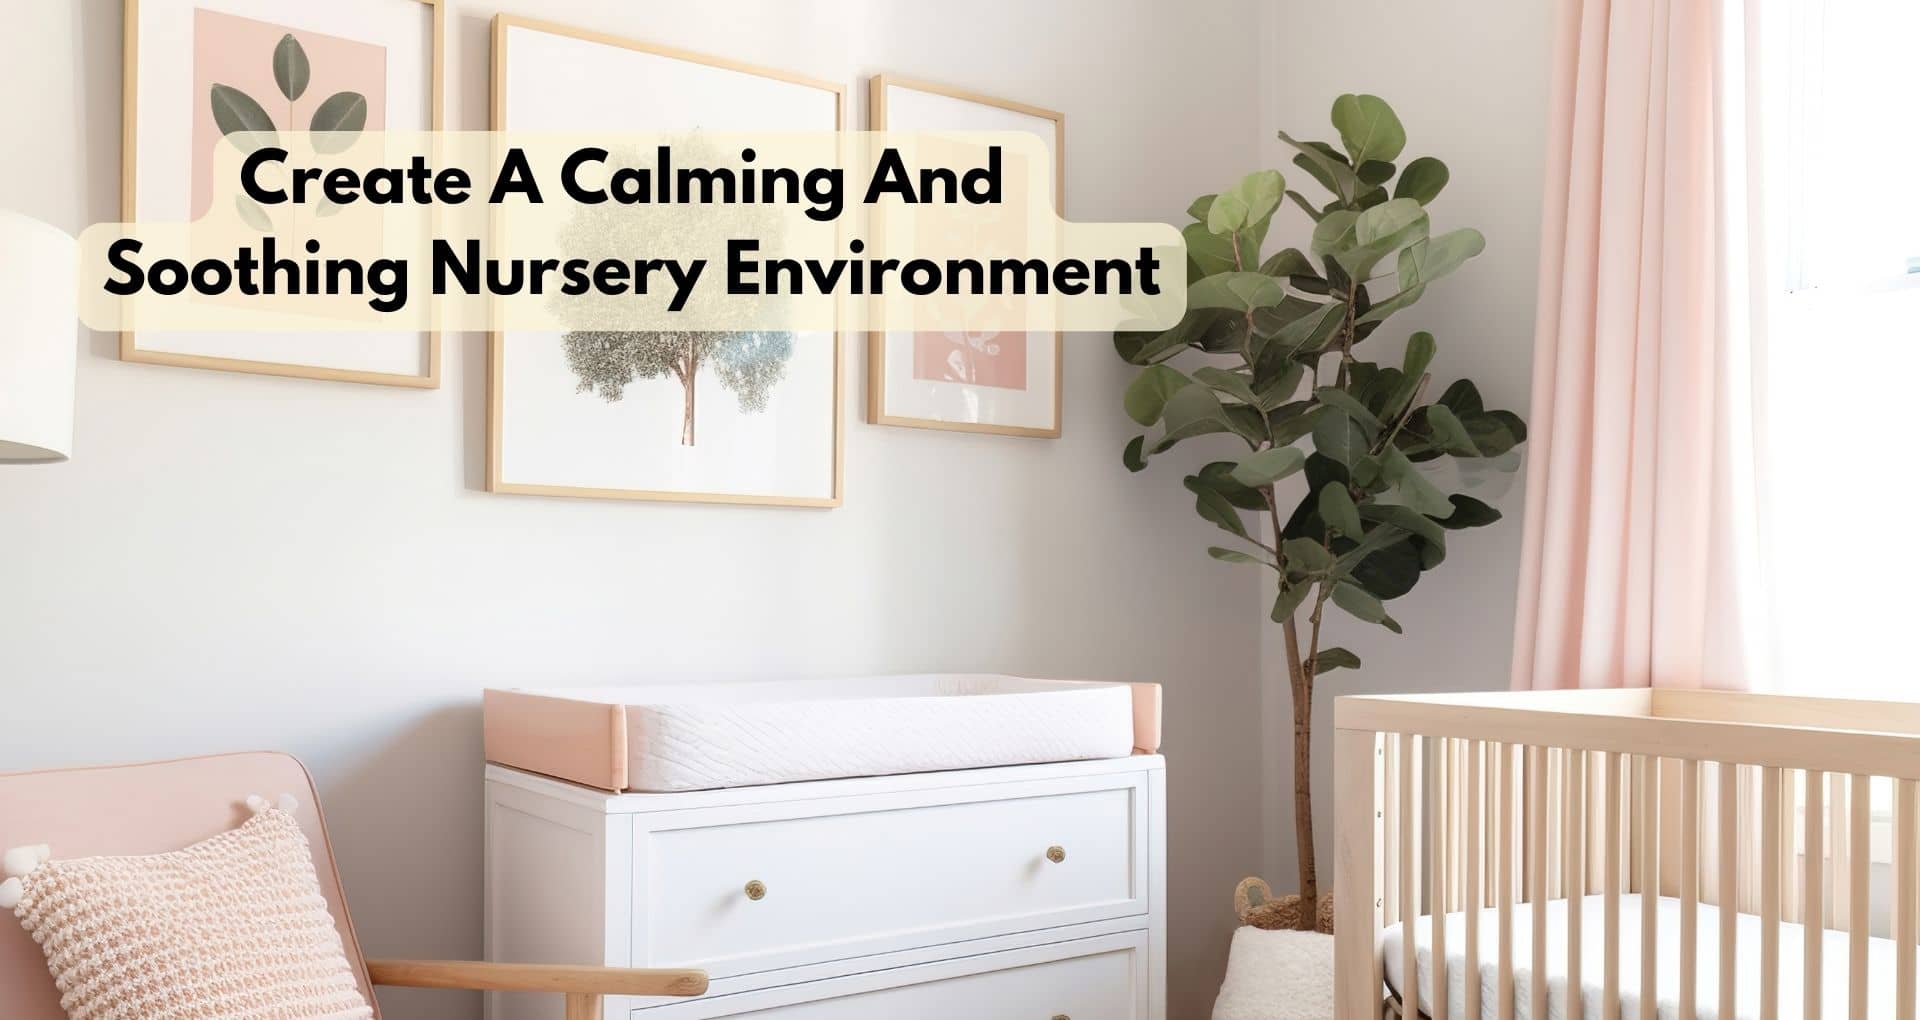 How Do I Create A Calming And Soothing Nursery Environment?